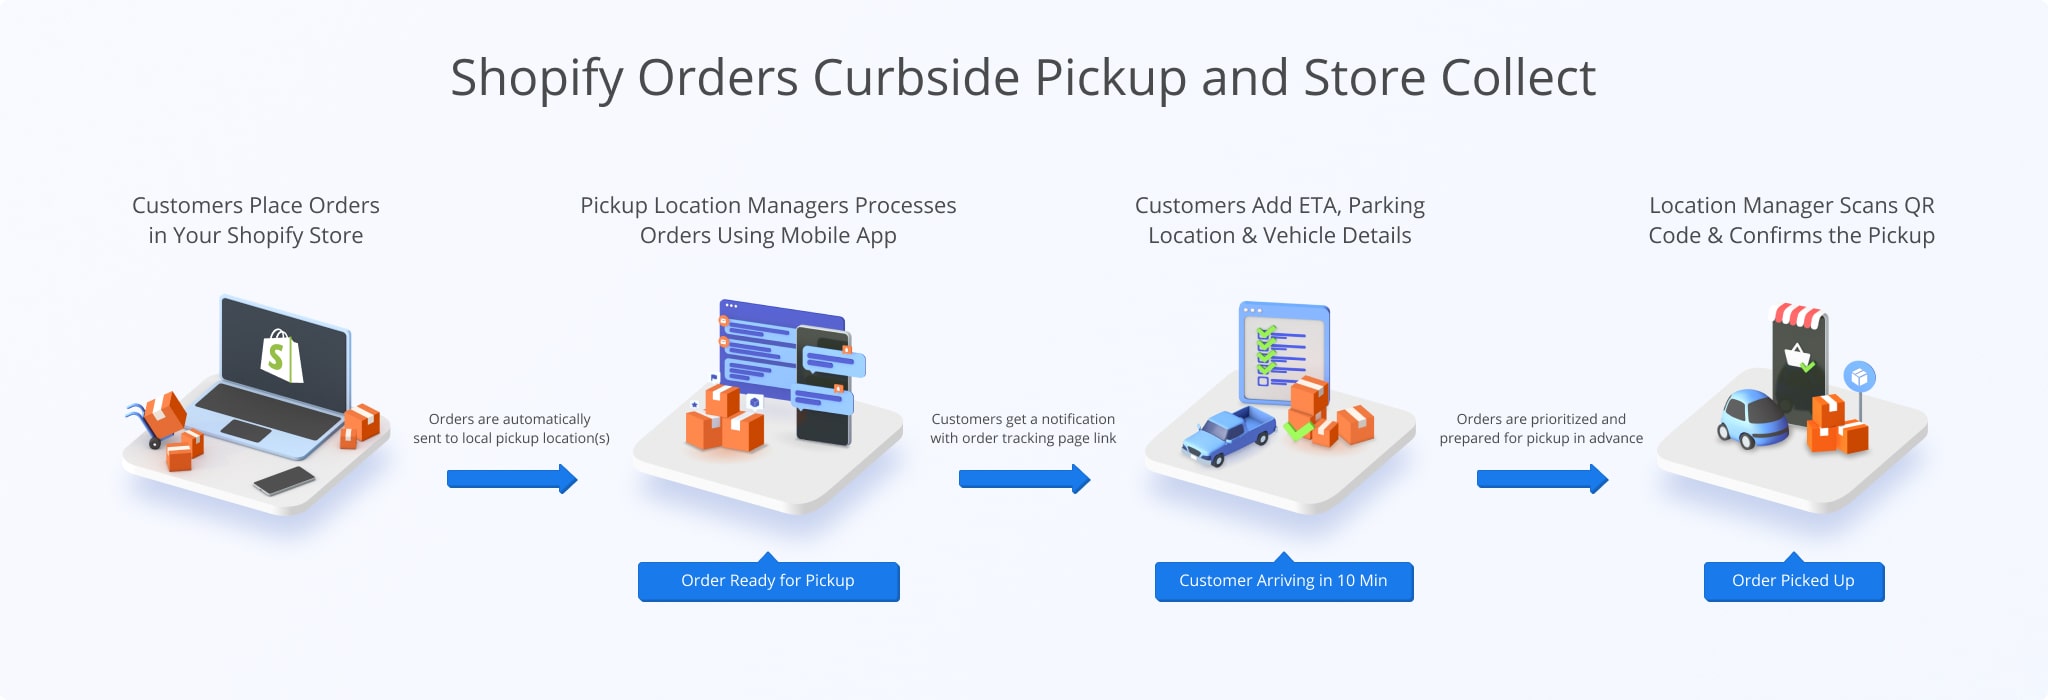 Automatically send Shopify orders for local pickup and use Route4Me's curbside pickup and store collect app to complete pickups.